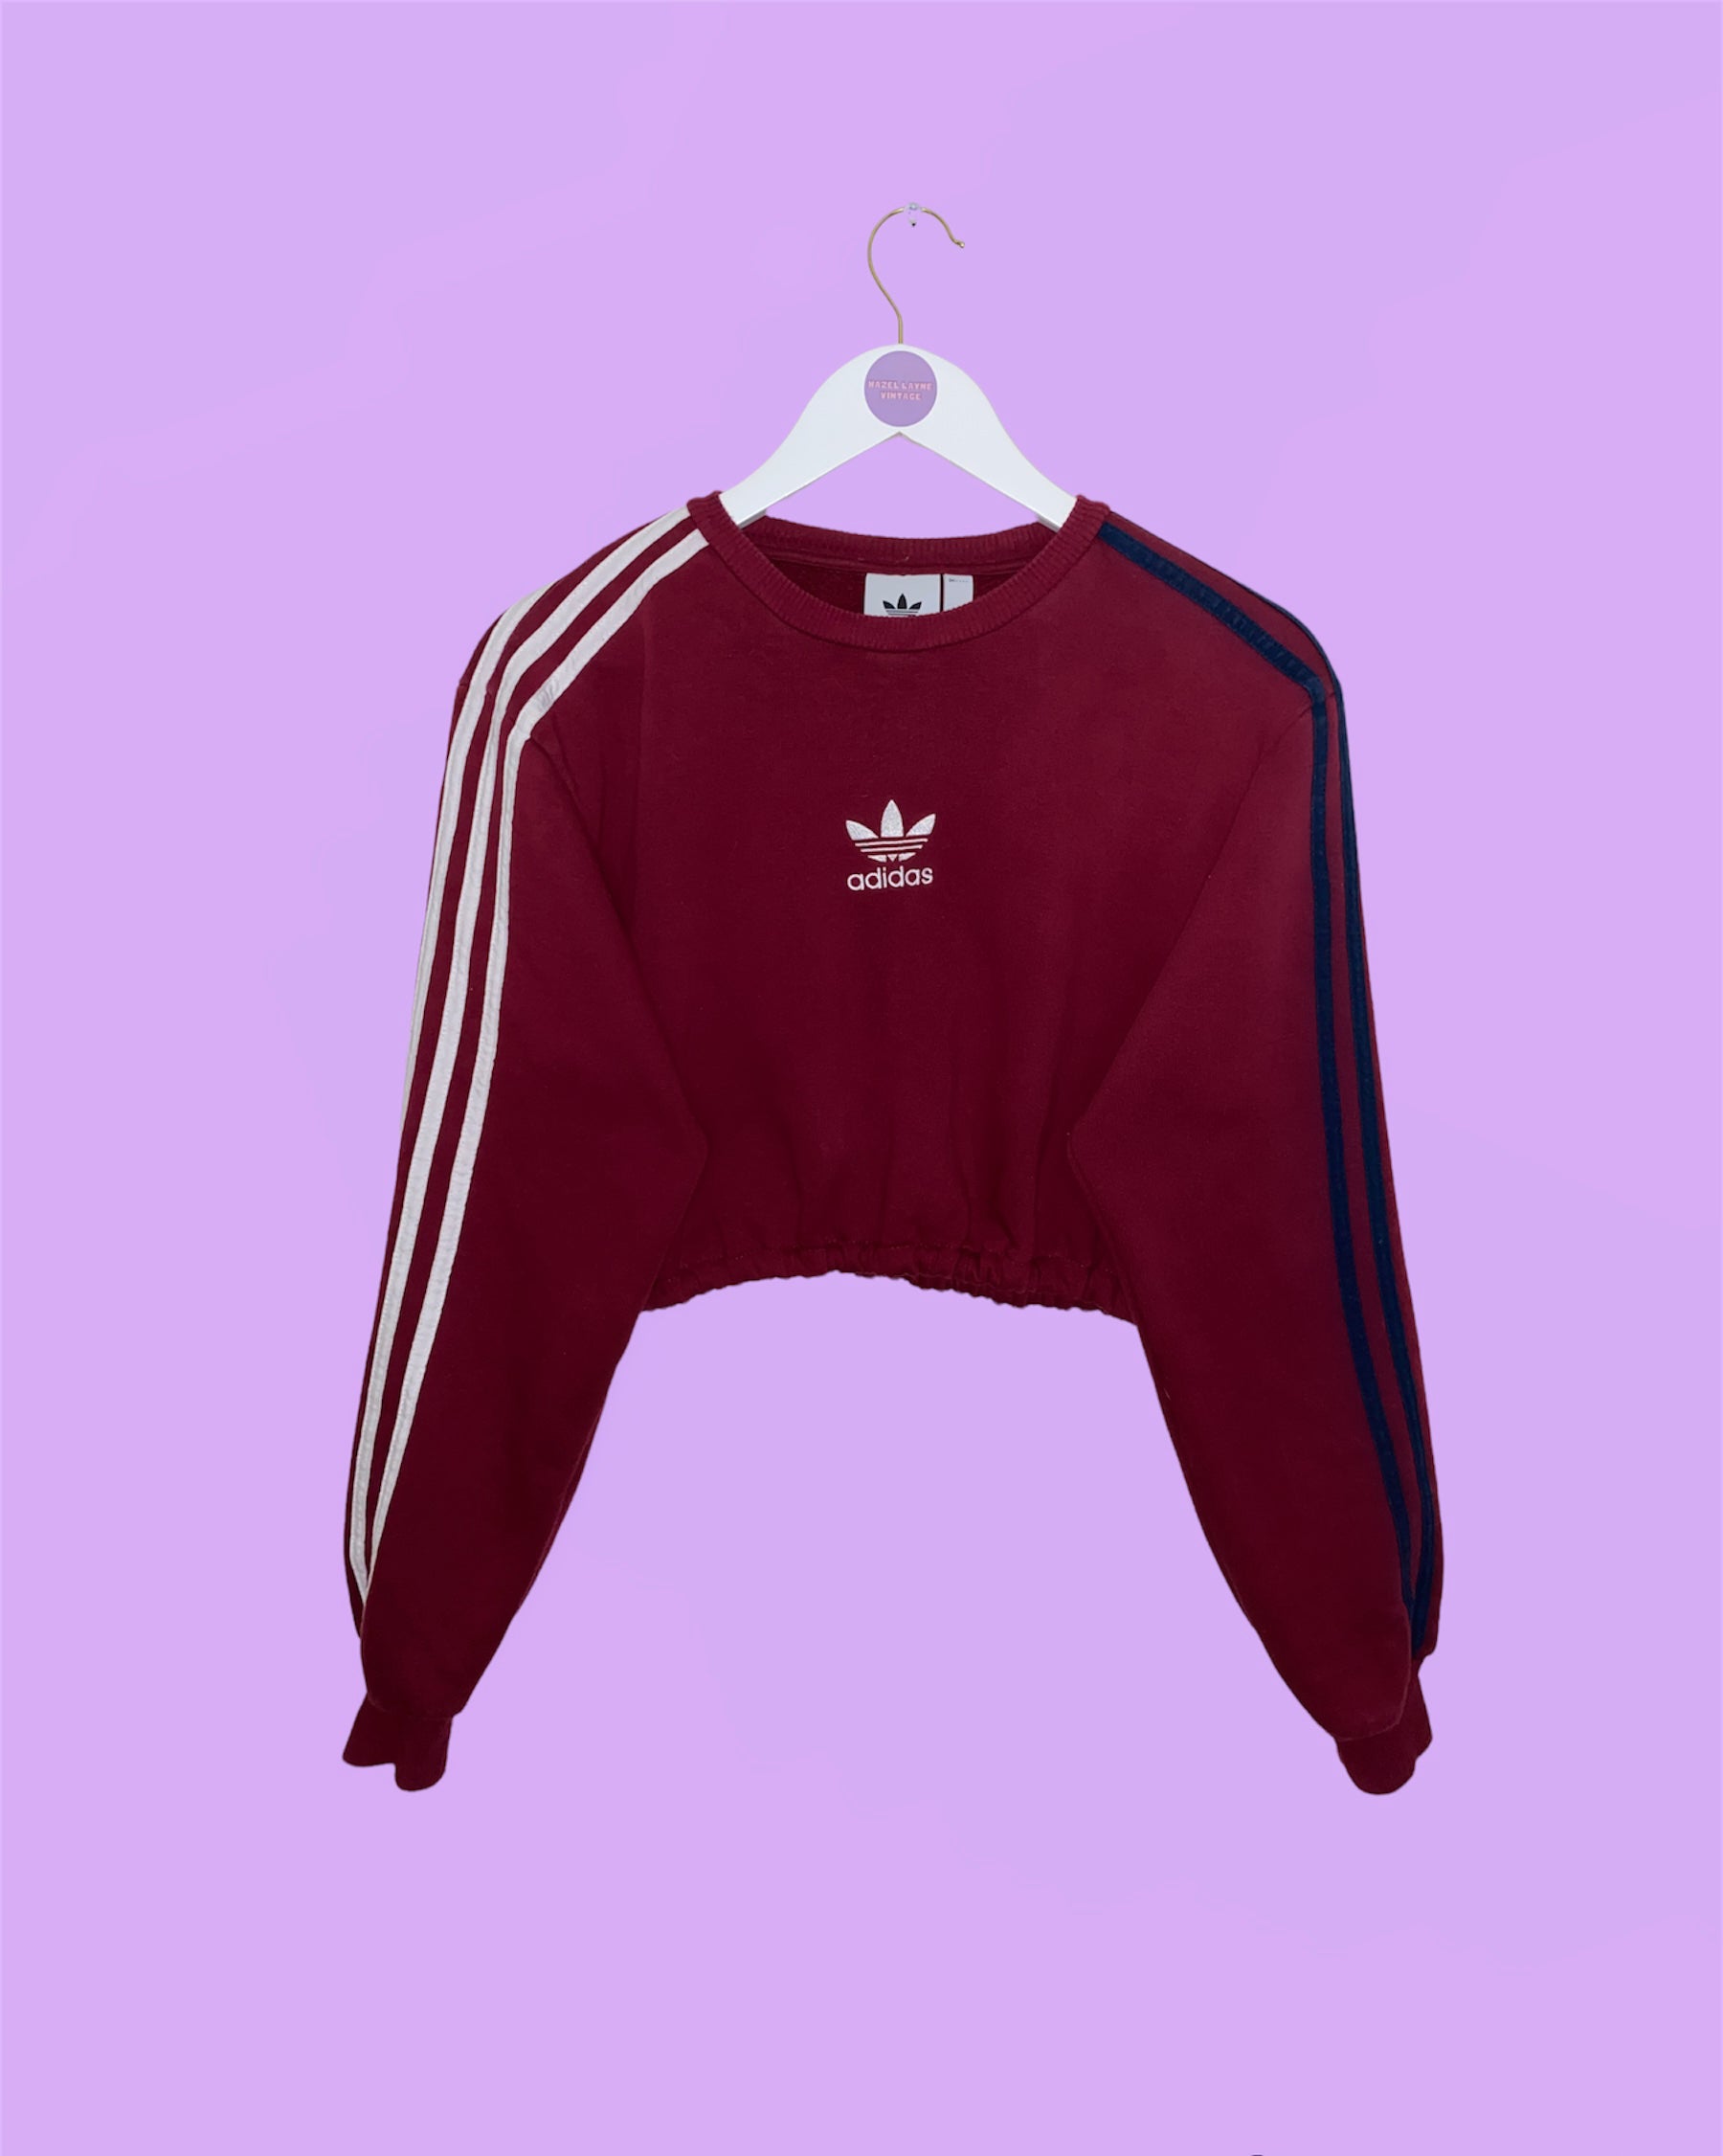 burgundy cropped sweatshirt with white adidas logo shown on a white clothes hanger on a lilac background